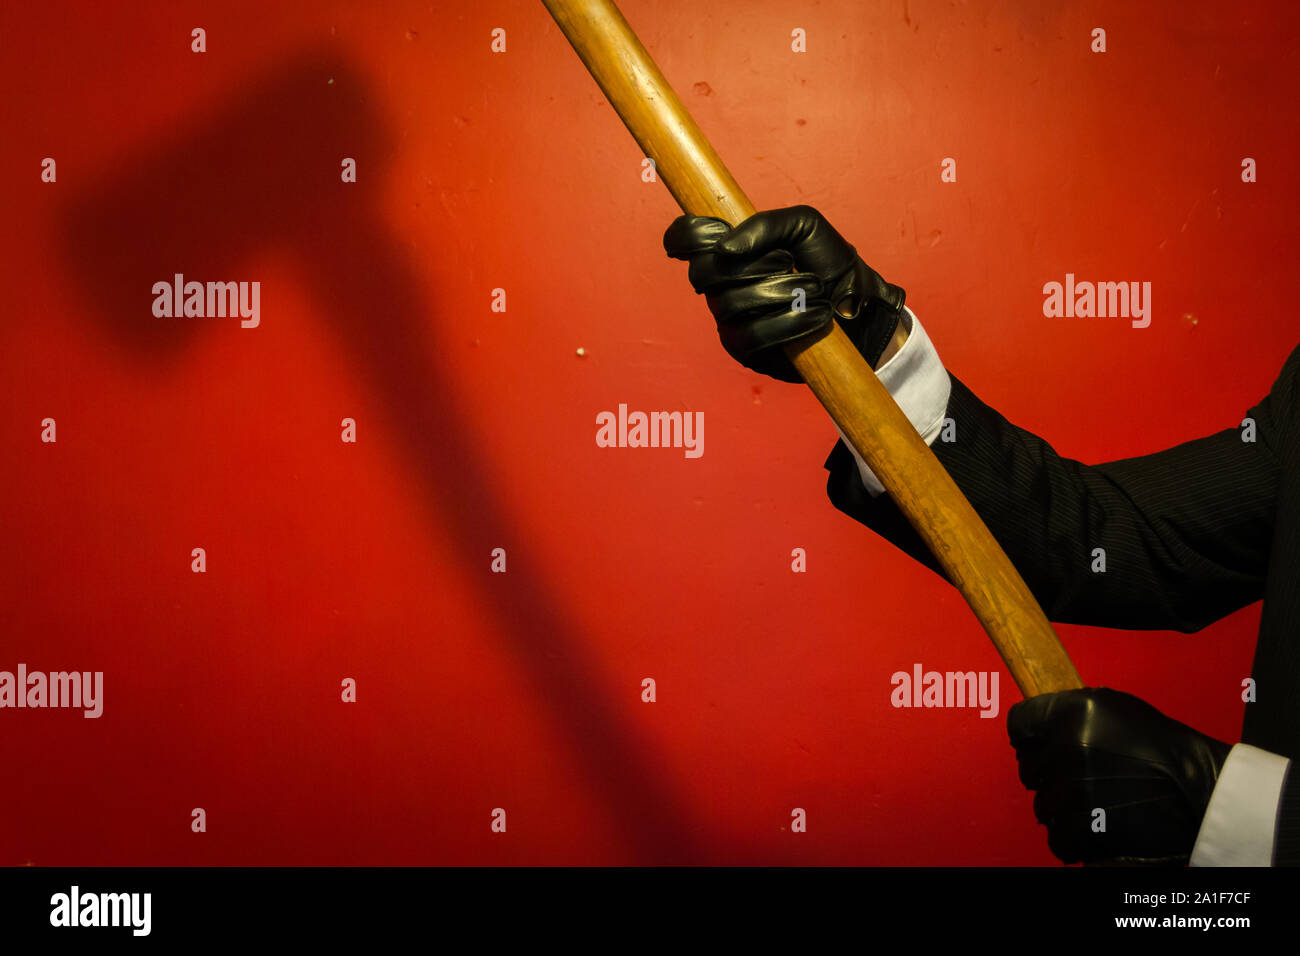 Shadow of Axe Held by Man in Dark Suit and Leather Gloves. Concept of Horror Movie Murderer. Dark Stock Photo. Stock Photo